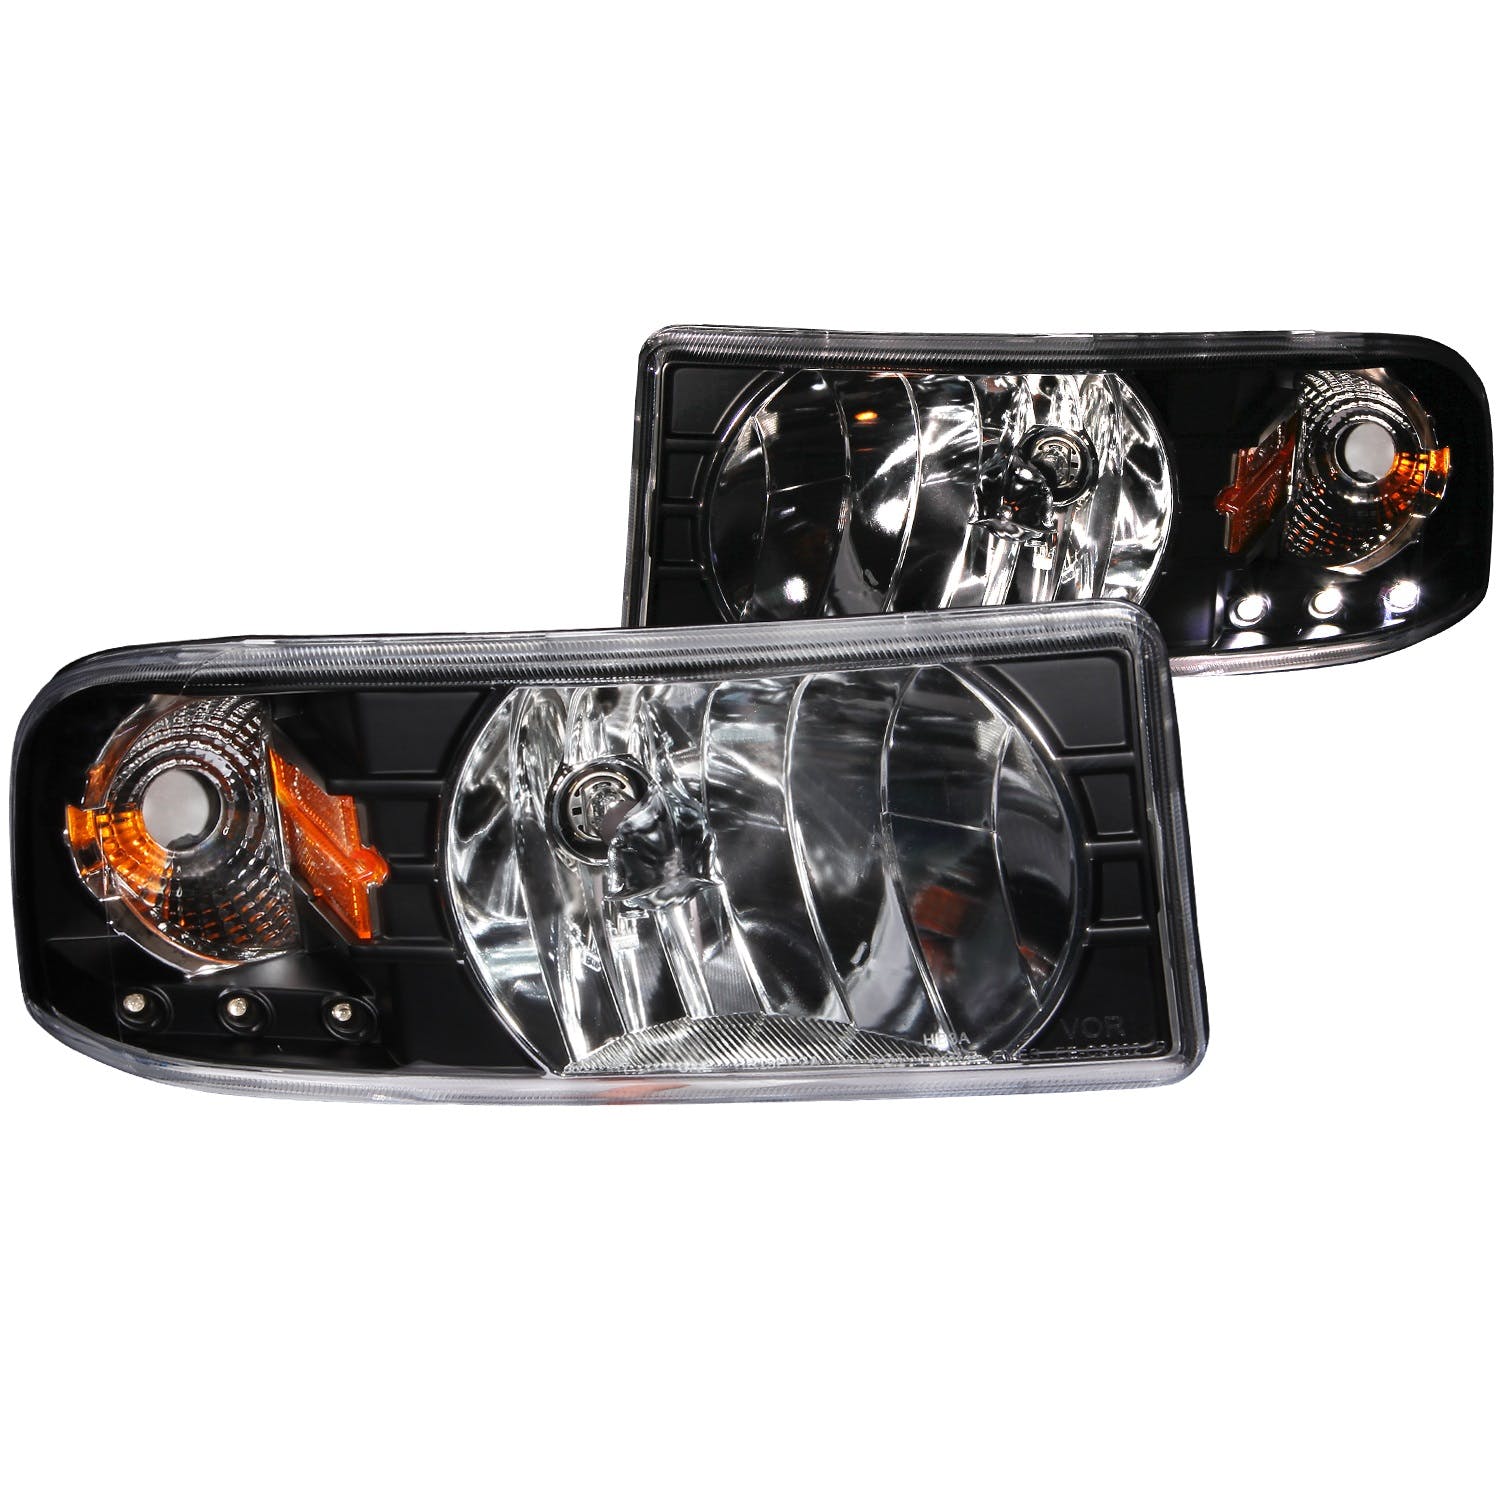 AnzoUSA 111205 Crystal Headlights Black with LED